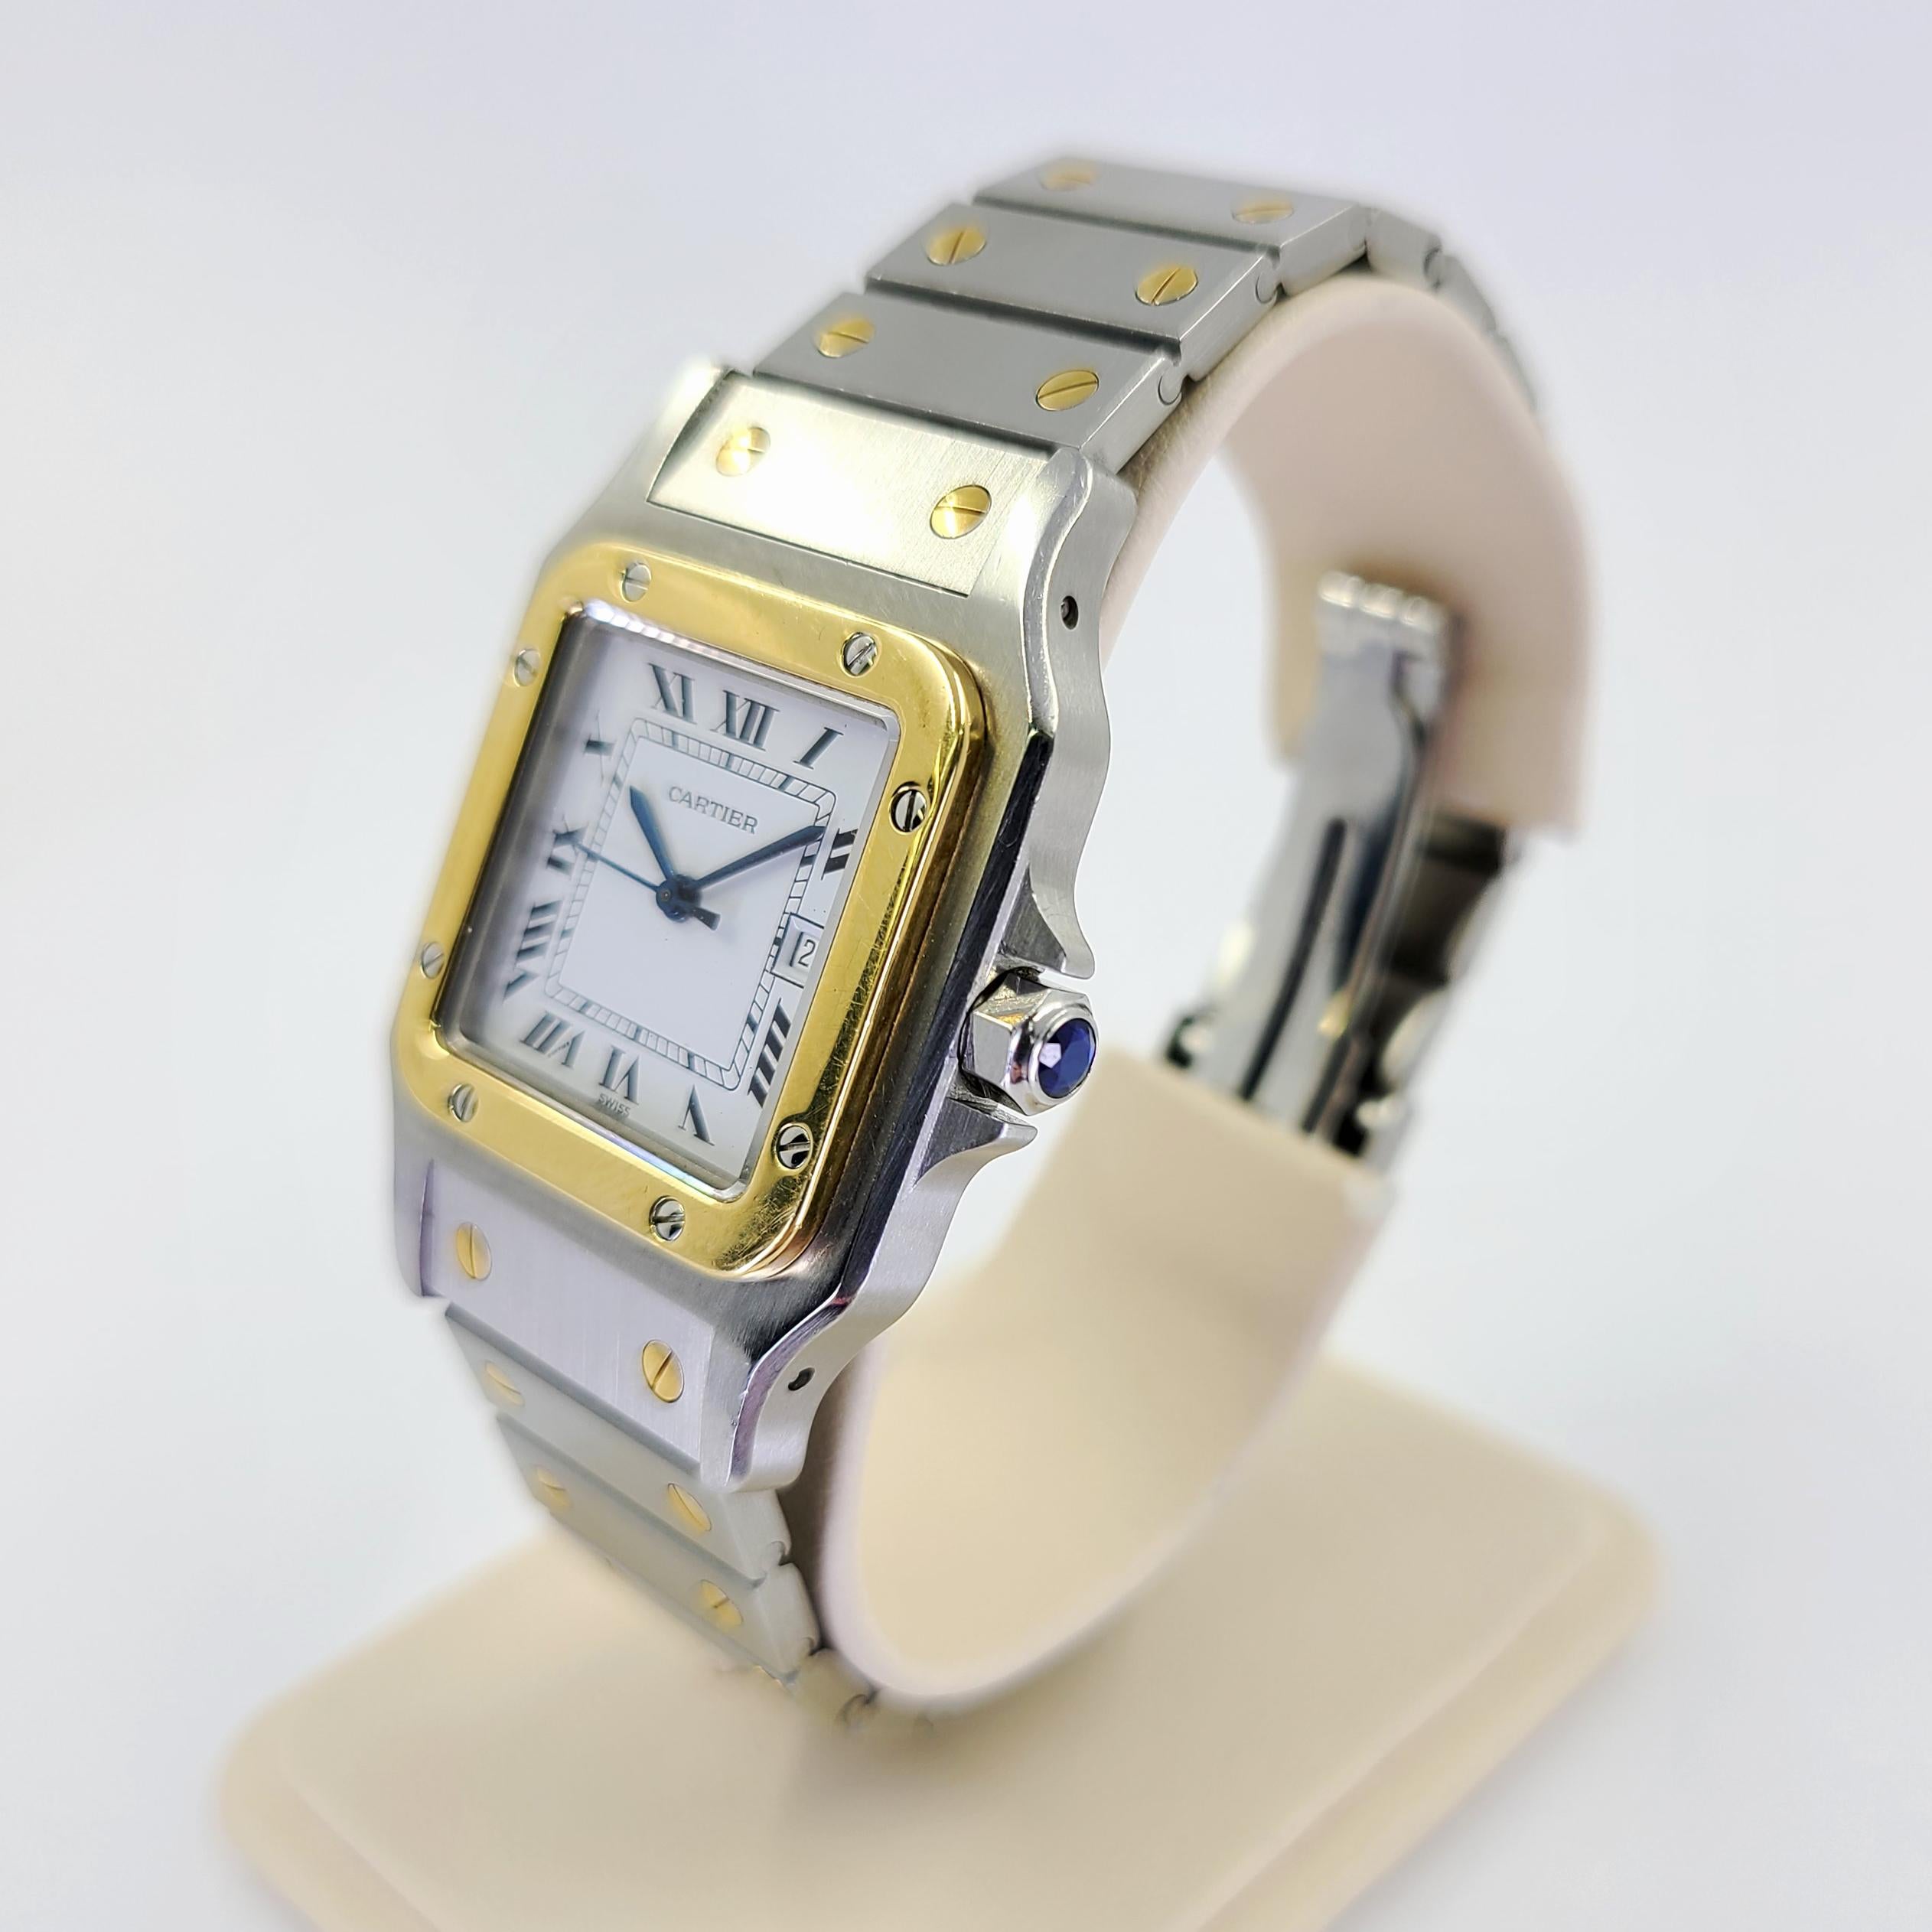 Pre-Owned Cartier Santos 18 Karat Yellow Gold & Steel Automatic Watch On Bracelet. 29mm Midsize Case With White Roman Dial. Includes 1 Year Timekeeping Warranty.